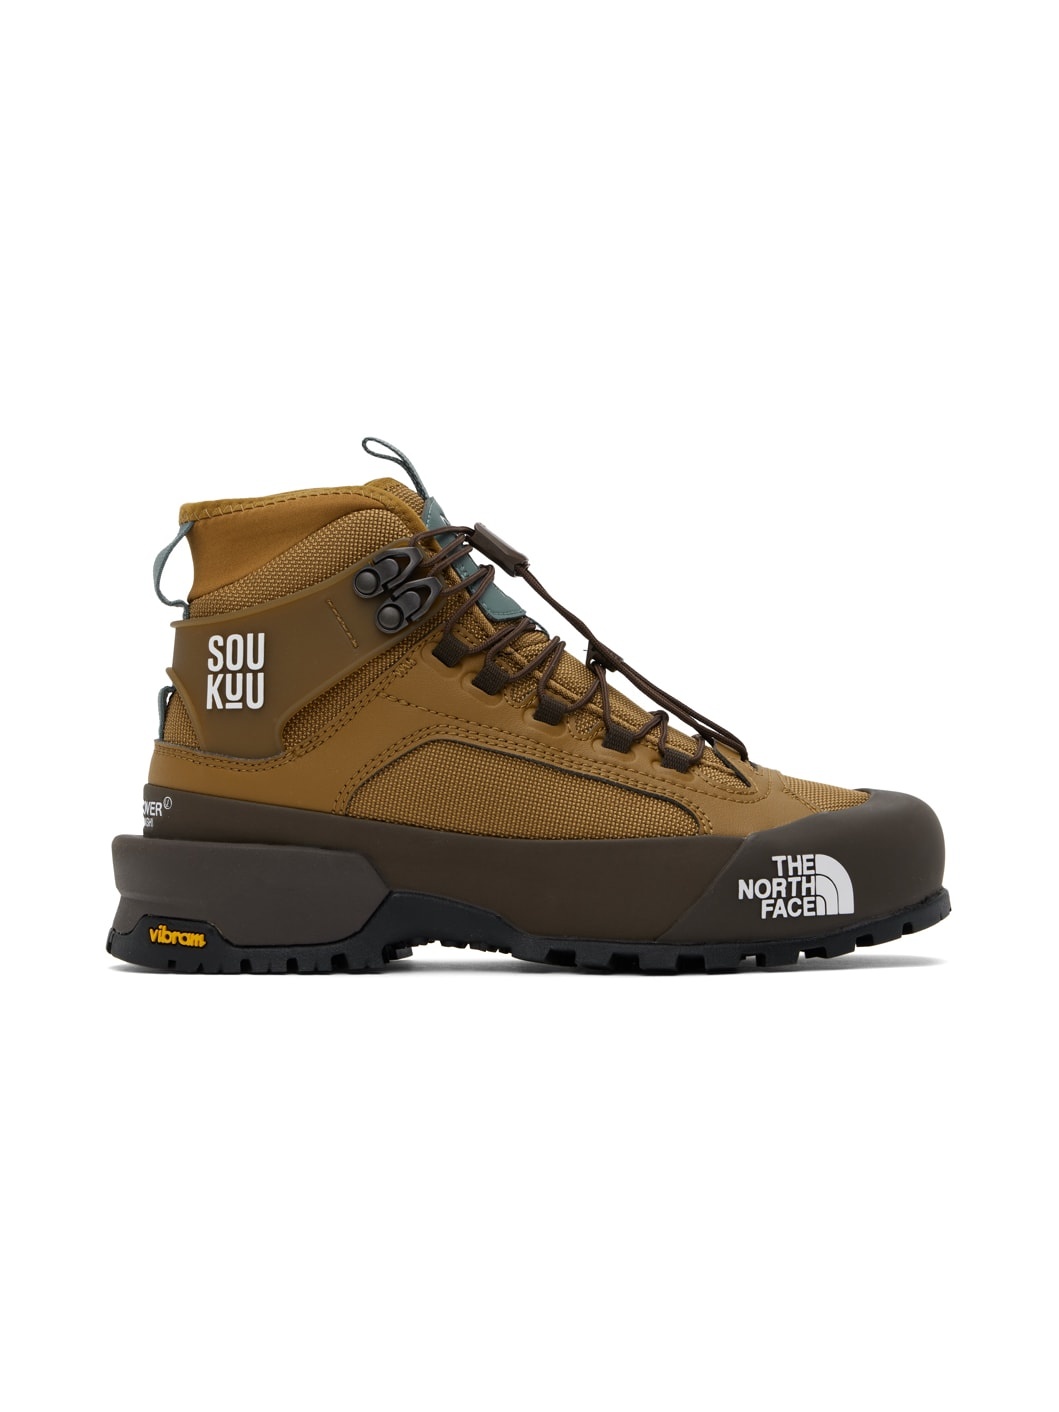 Brown The North Face Edition Soukuu Glenclyffe Boots - 1